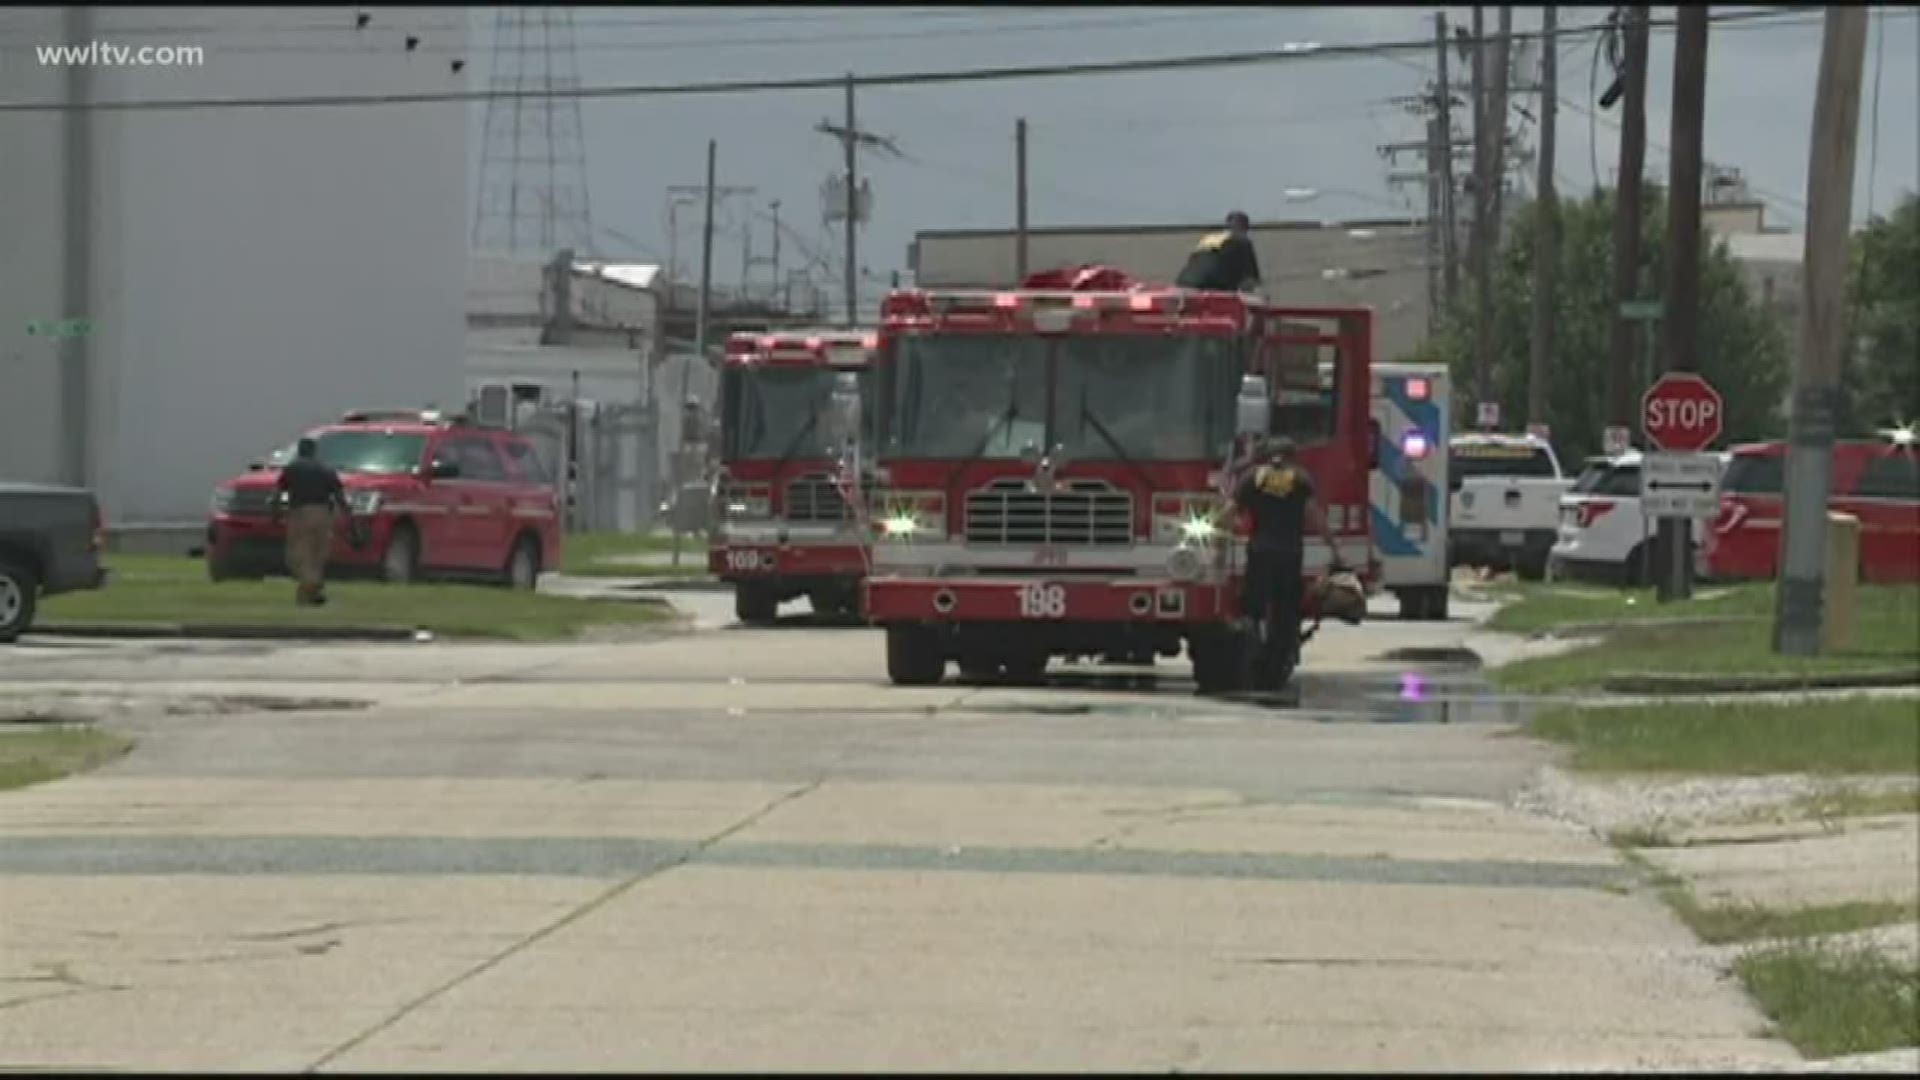 Clorine at chemical warehouse in Elmwood causes 2-alarm fire